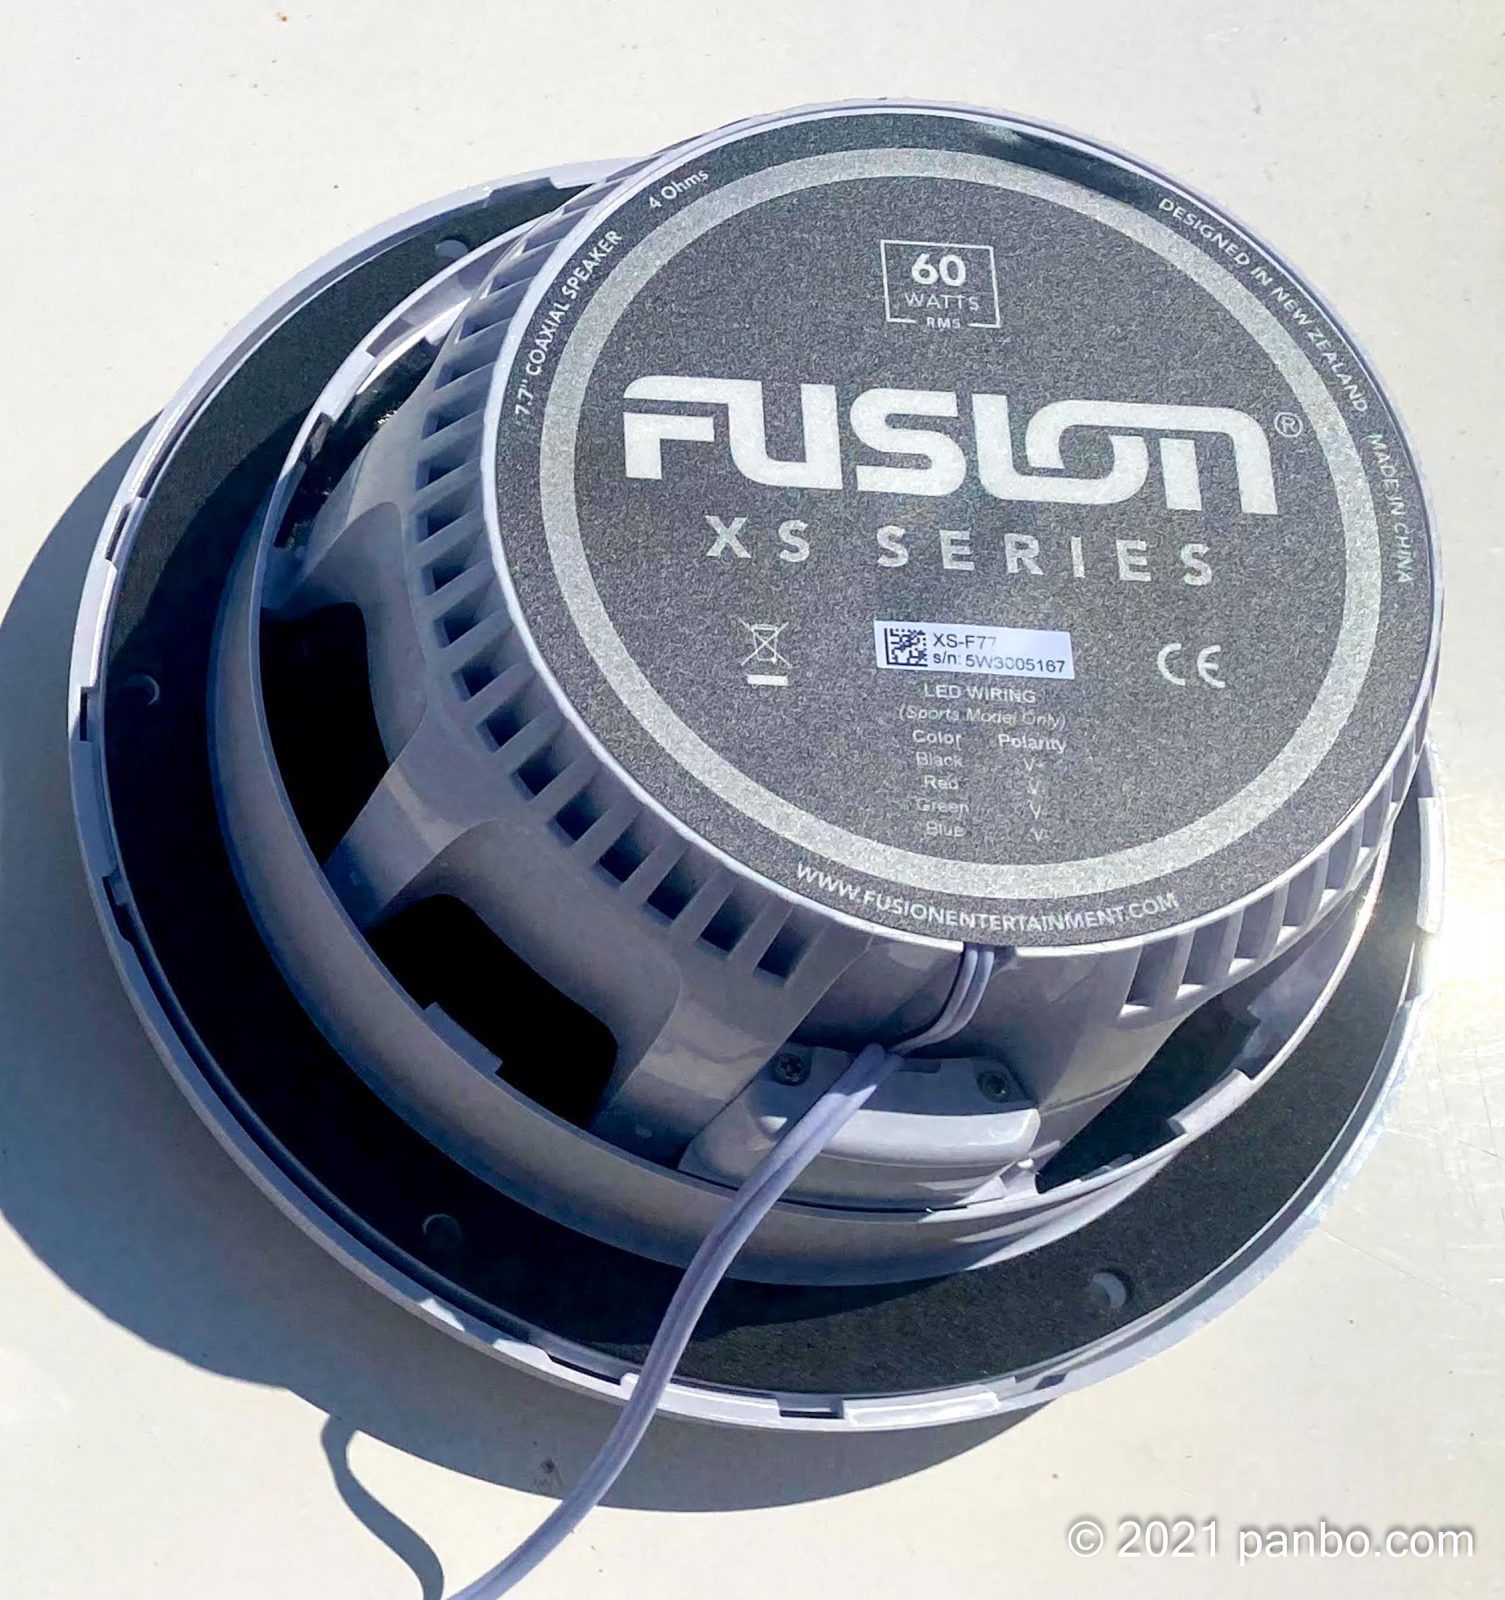 Fusion XS series speakers: sound & cost-effective - Panbo